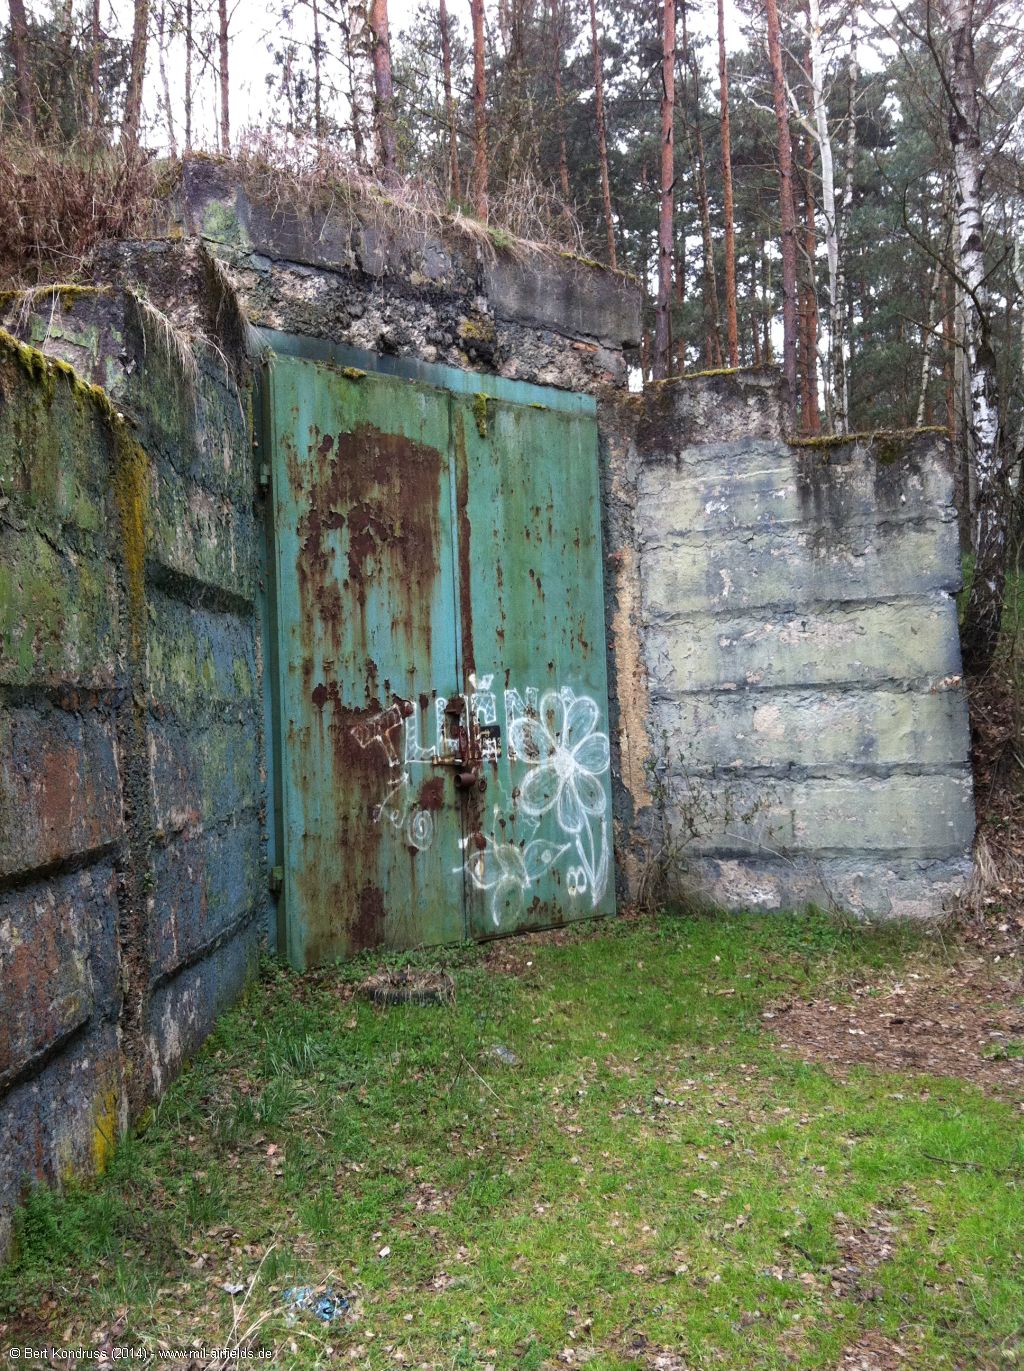 Back of the aircraft shelter